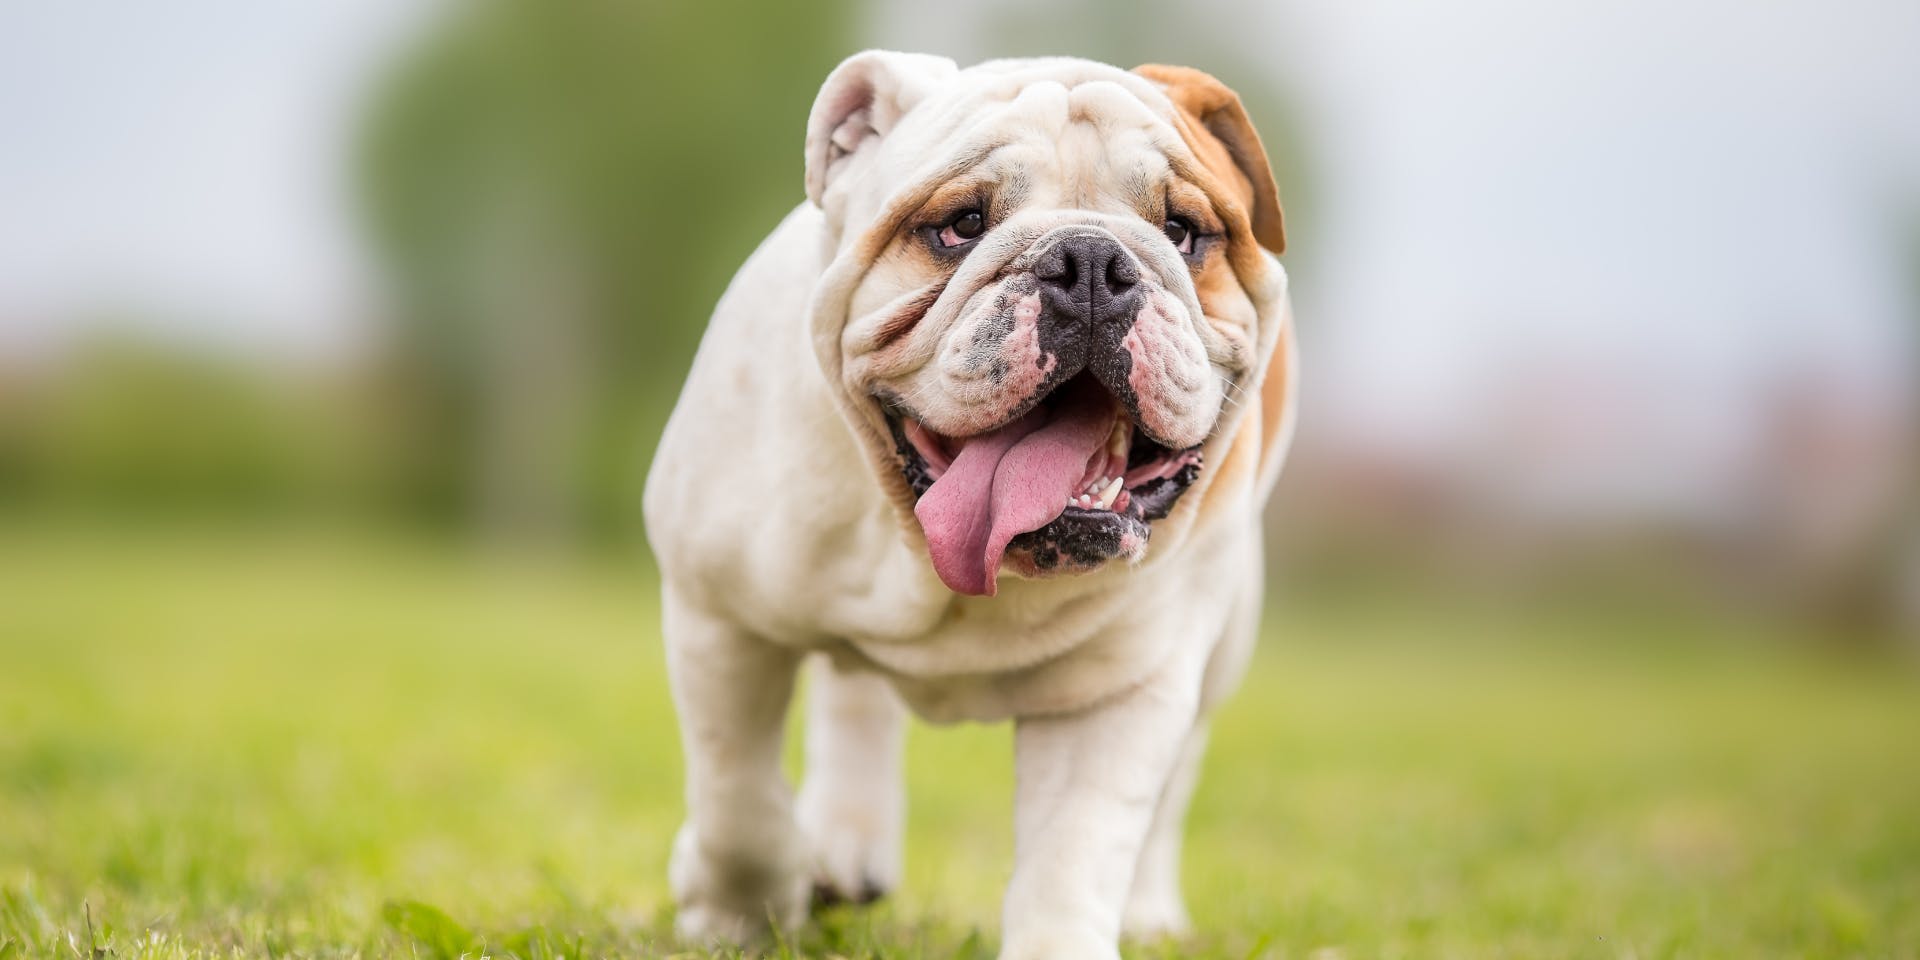 A bulldog playing in the park.